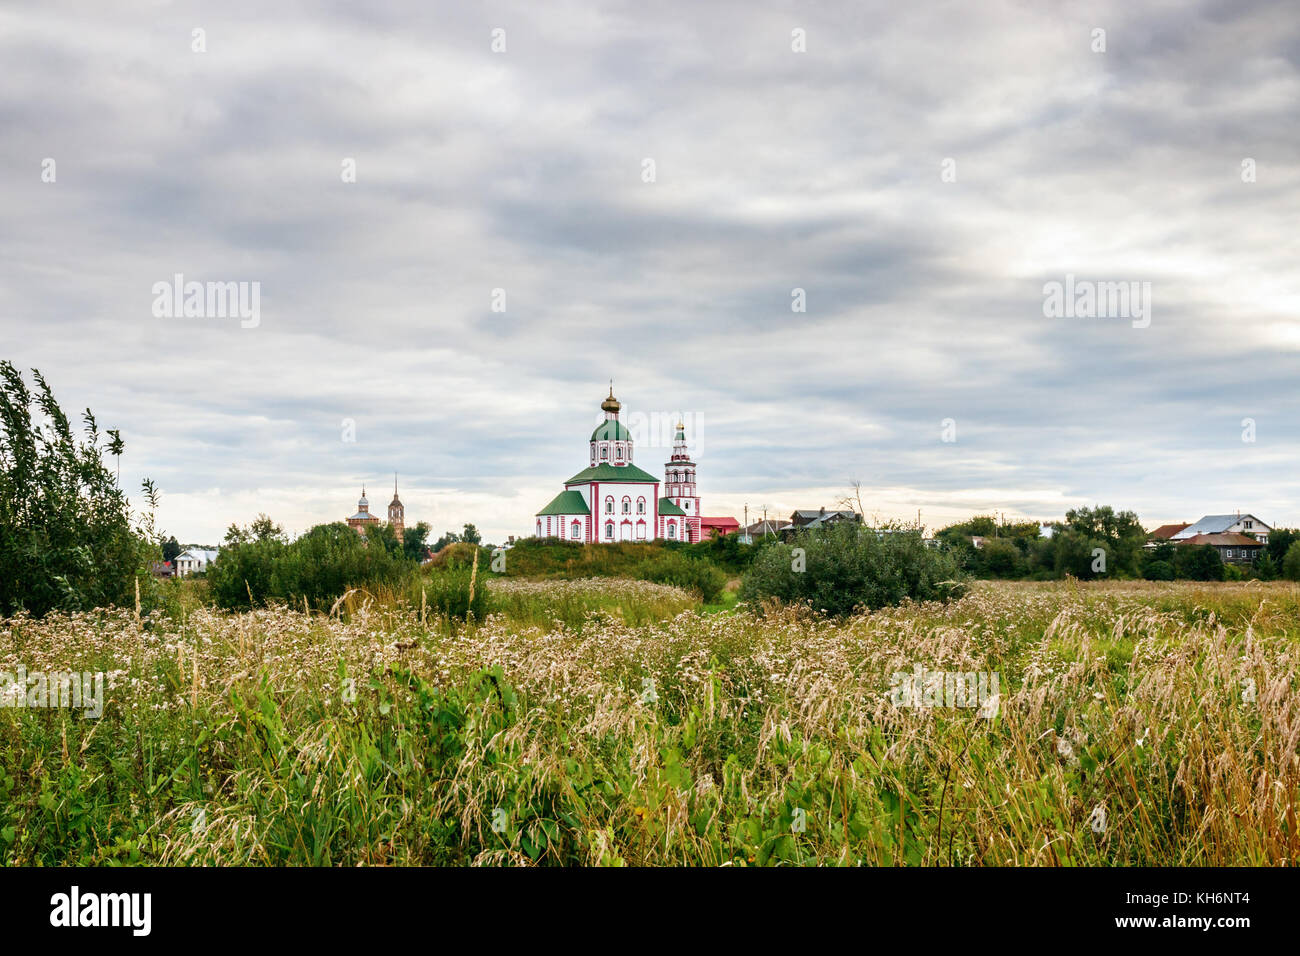 View of Suzdal with the St Elijah Church and a field with green grasses and white flowers under a cloudy sky, Suzdalsky District, Golden Ring, Russia. Stock Photo